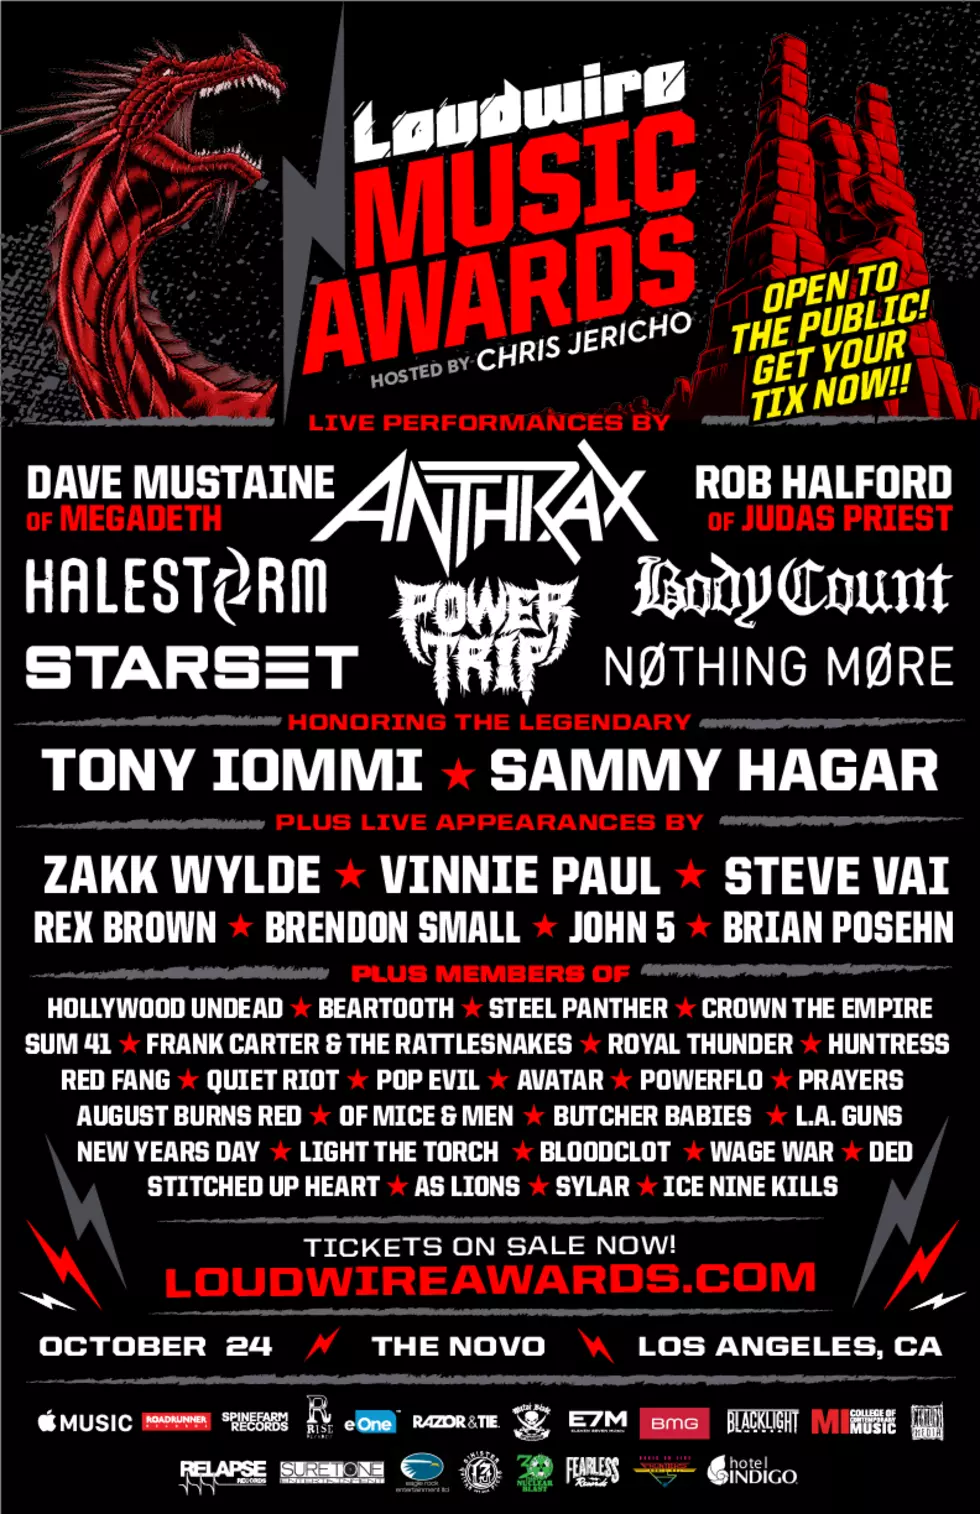 Loudwire Music Awards Tickets Available Now!